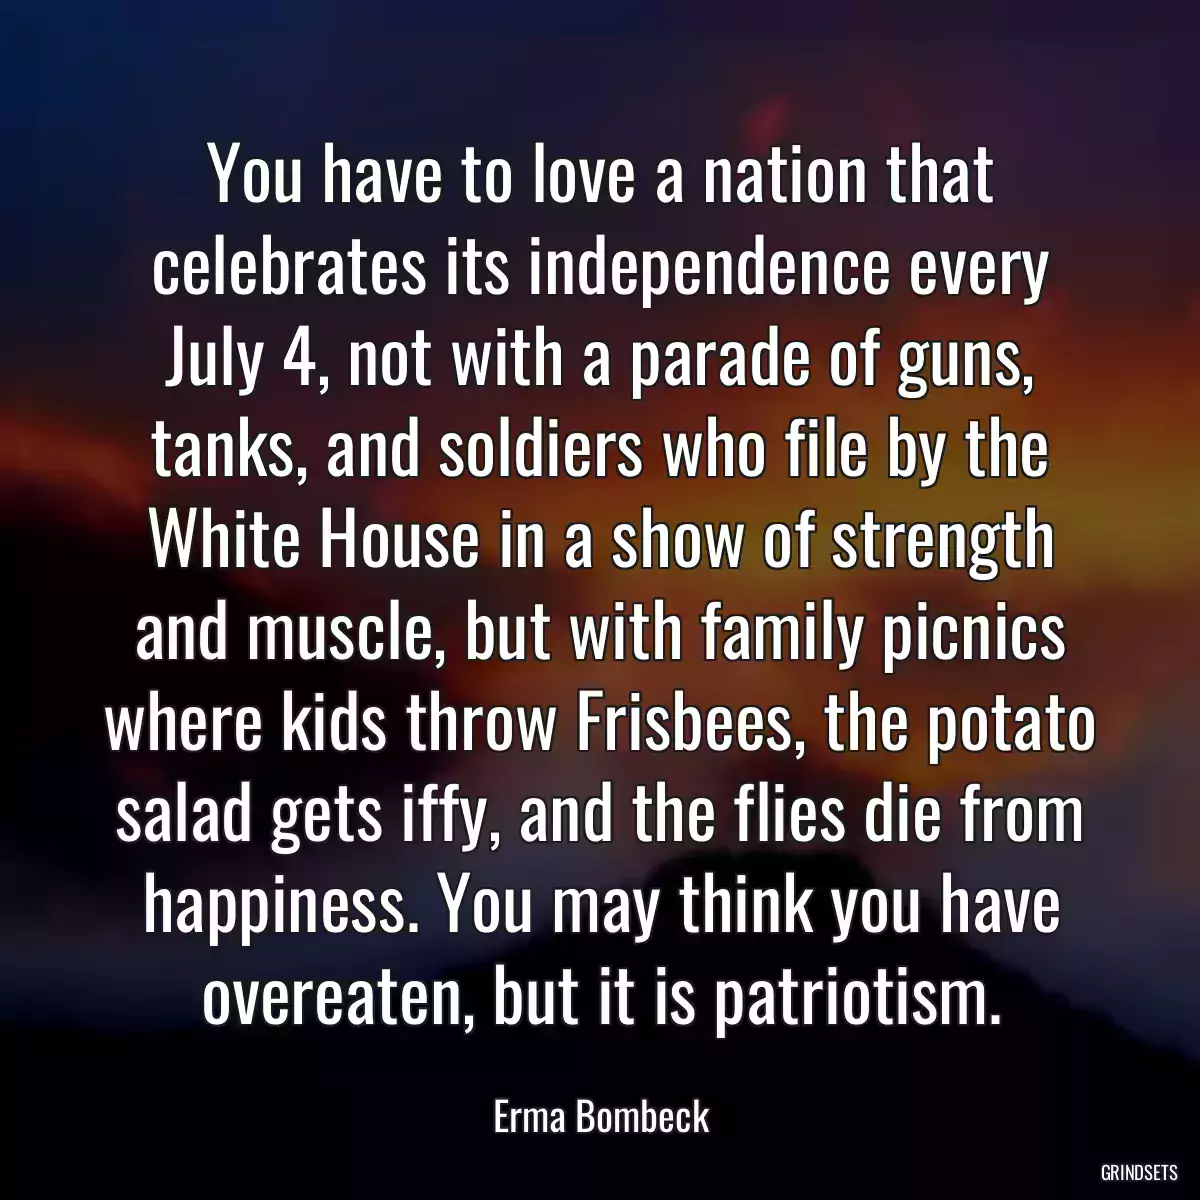 You have to love a nation that celebrates its independence every July 4, not with a parade of guns, tanks, and soldiers who file by the White House in a show of strength and muscle, but with family picnics where kids throw Frisbees, the potato salad gets iffy, and the flies die from happiness. You may think you have overeaten, but it is patriotism.